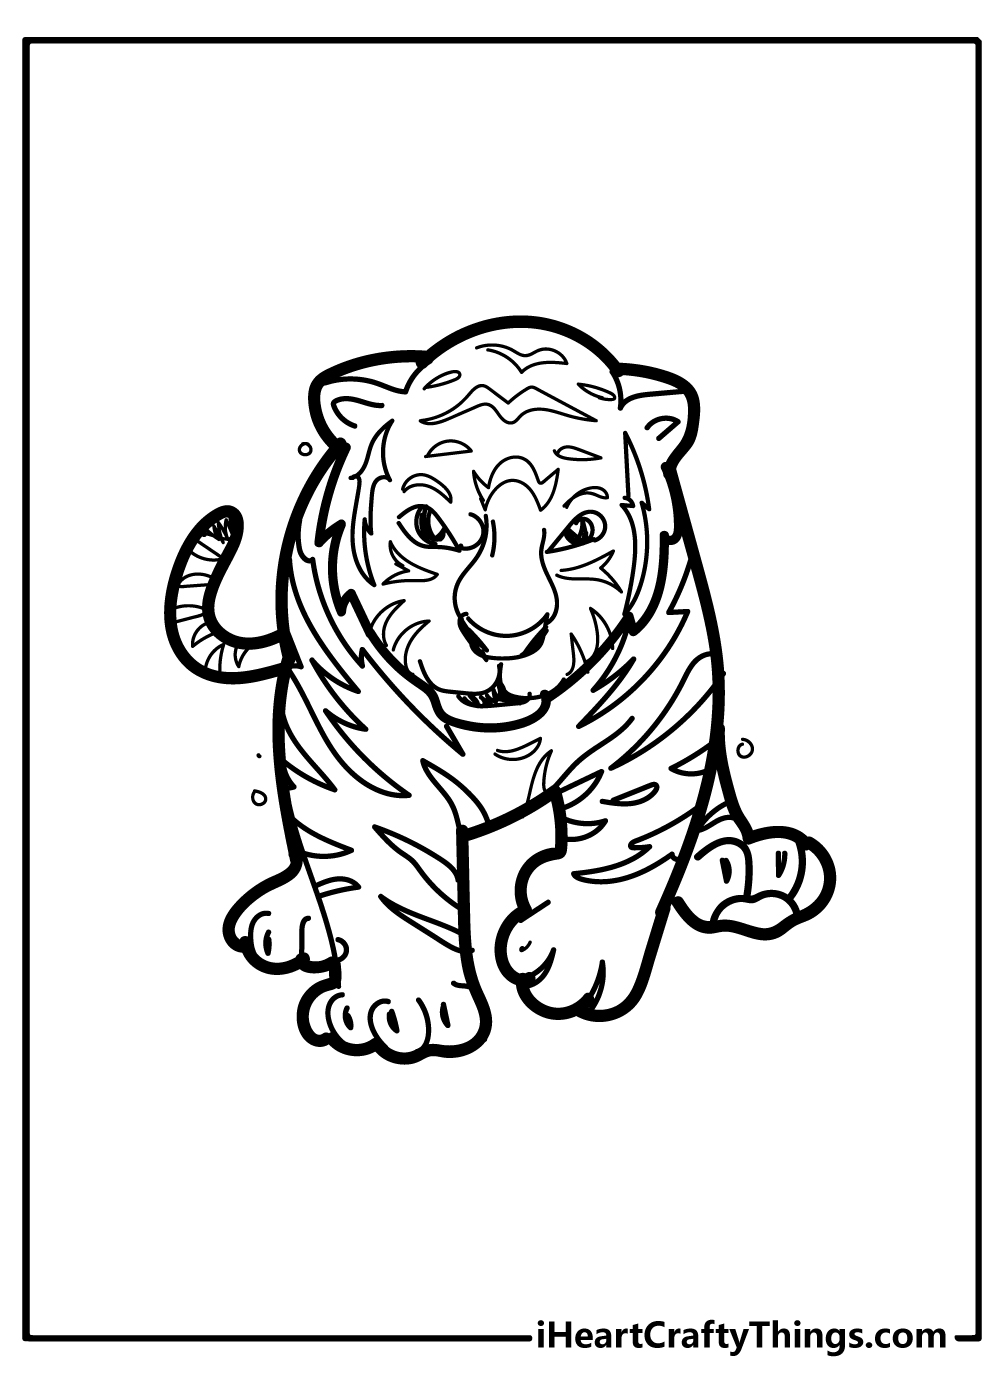 Tiger Coloring Book for adults free download